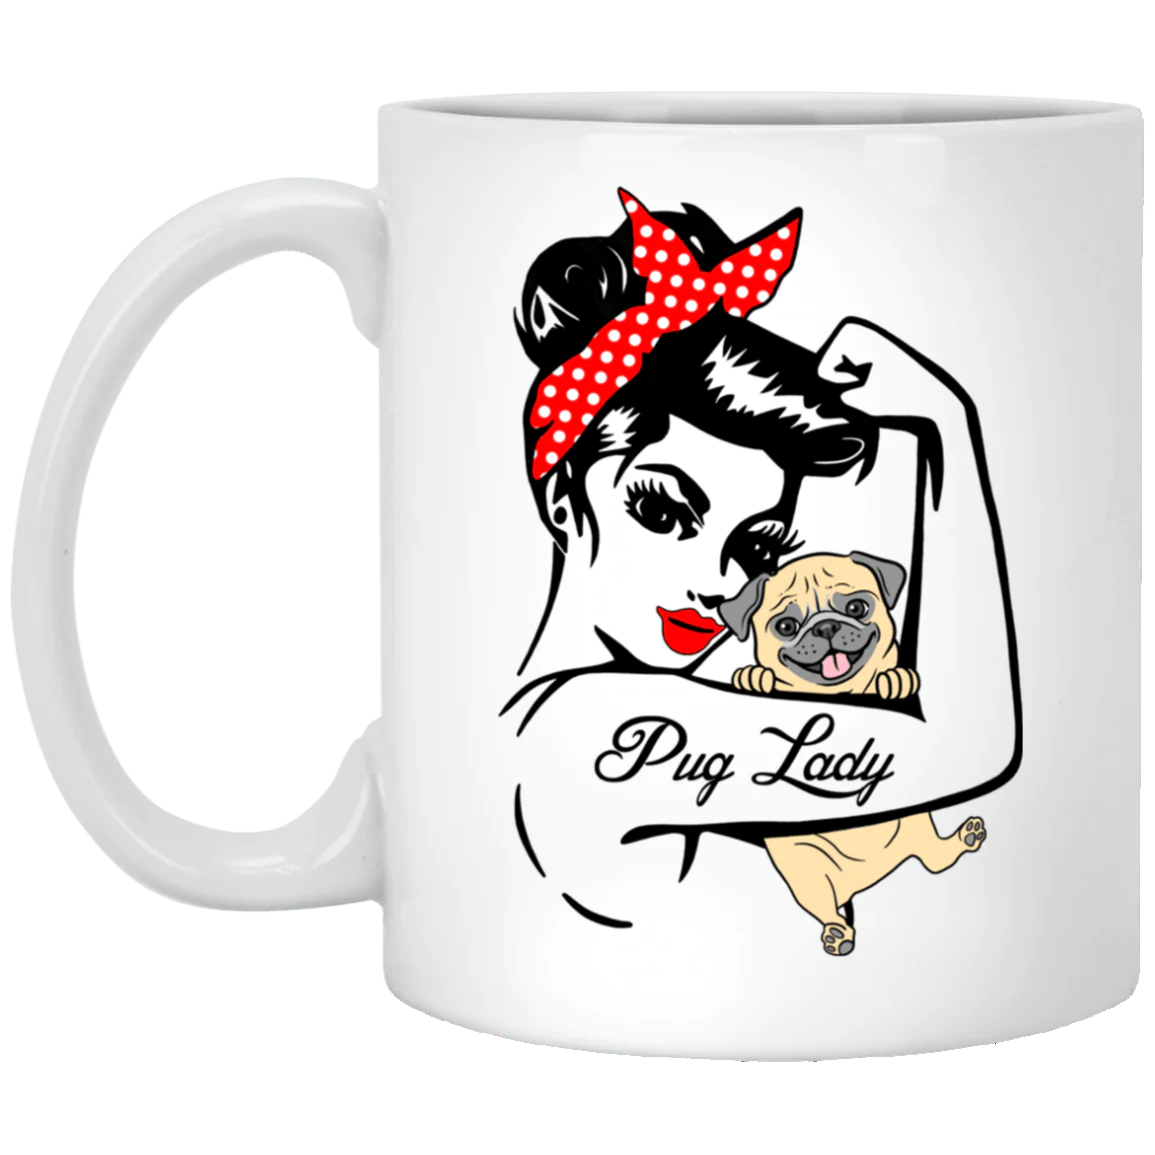 Pug Lady Mug Cool Gifts For Women Love Puggy Puppies